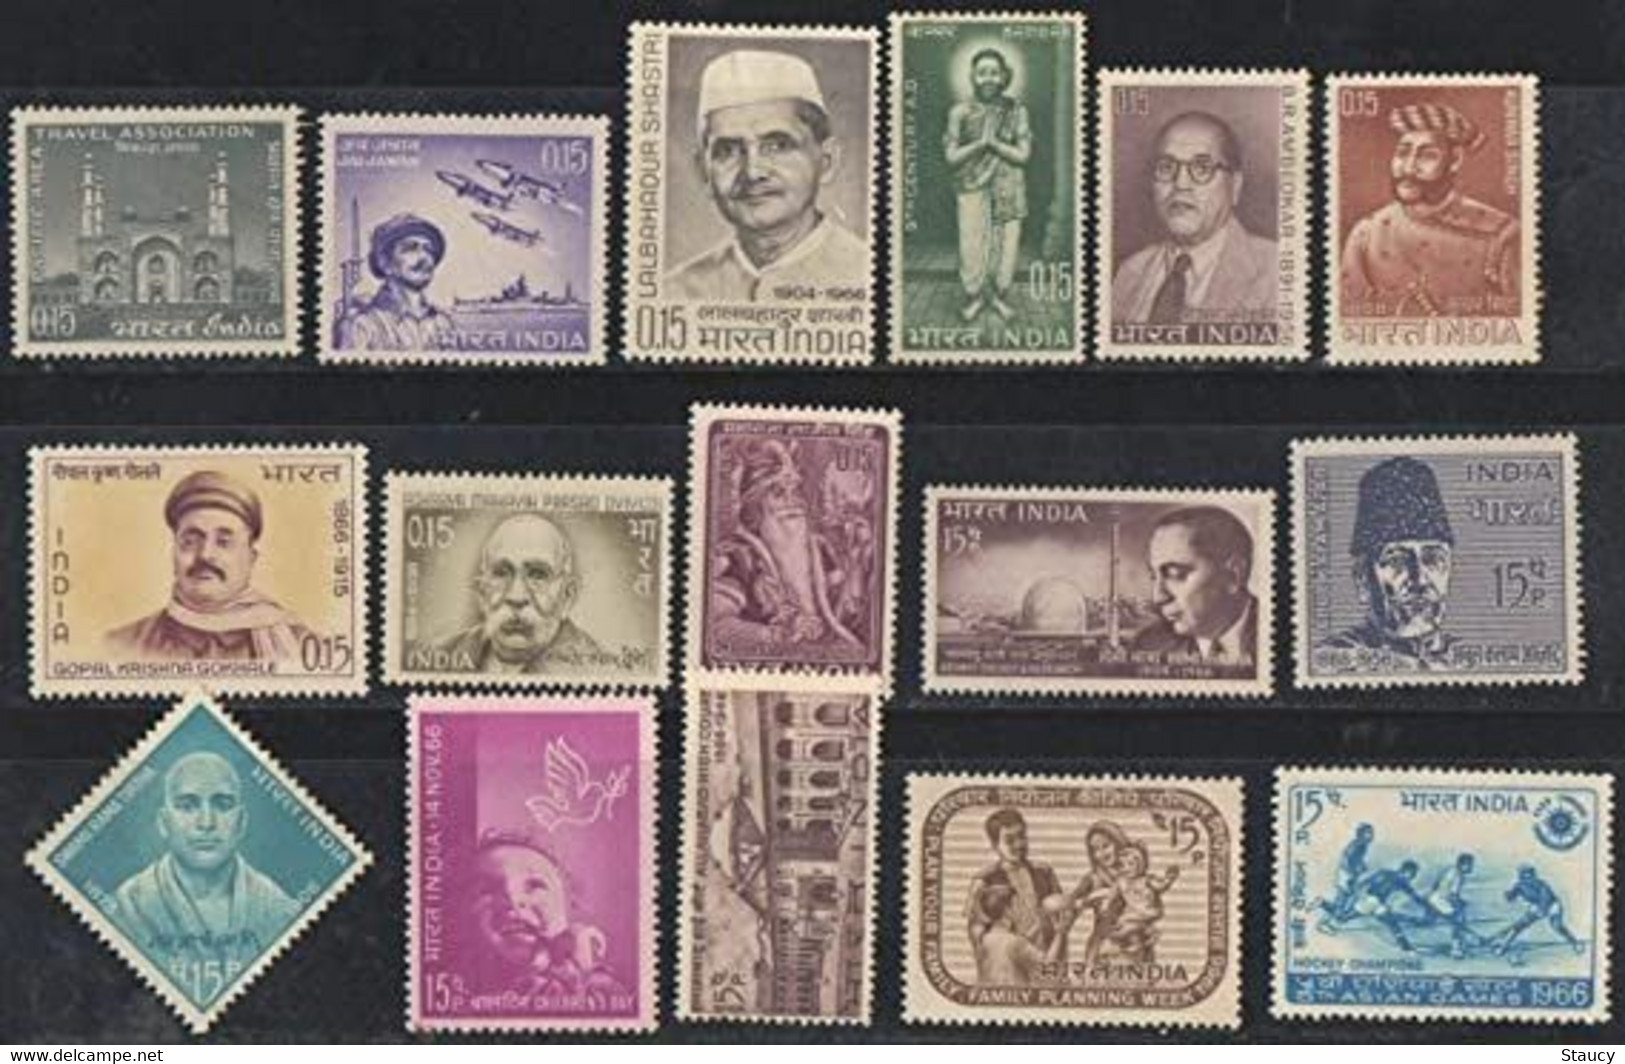 India 1966 Complete Year Pack / Set / Collection Total 16 Stamps (No Missing) MNH As Per Scan - Full Years